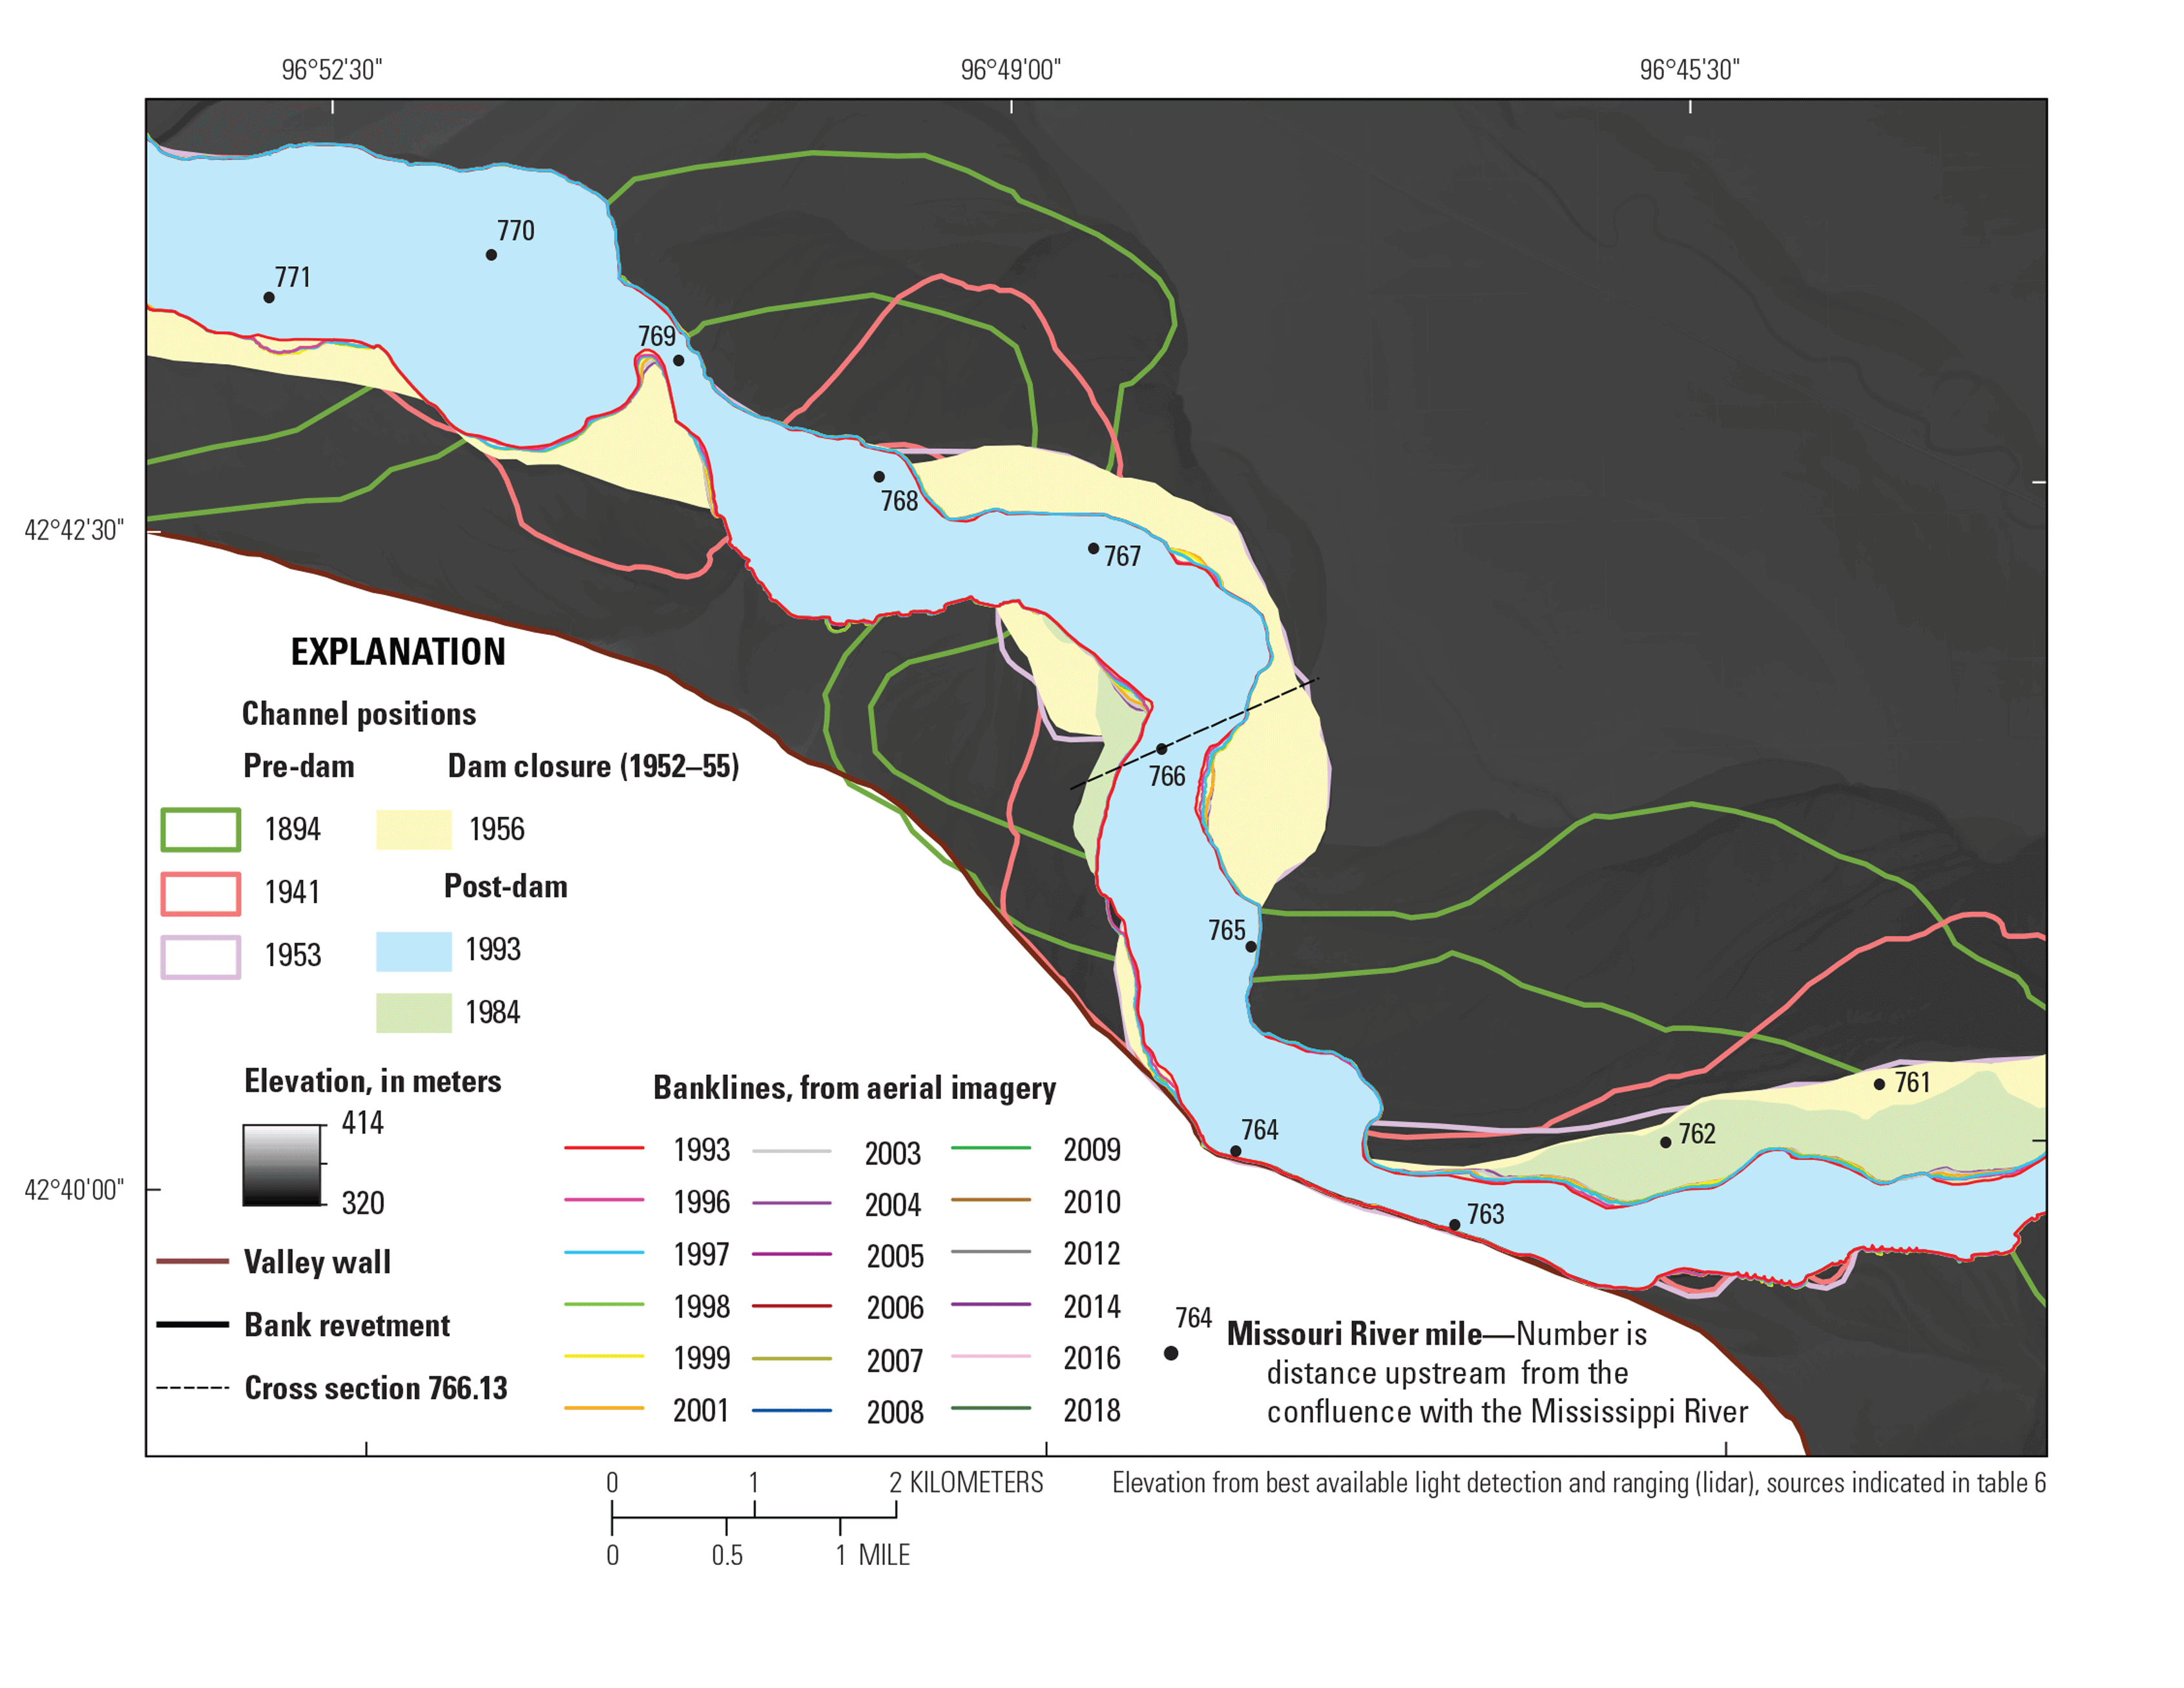 Map showing channel positions pre- and post-dam, during dam closure, with elevation
                        and lines for banklines